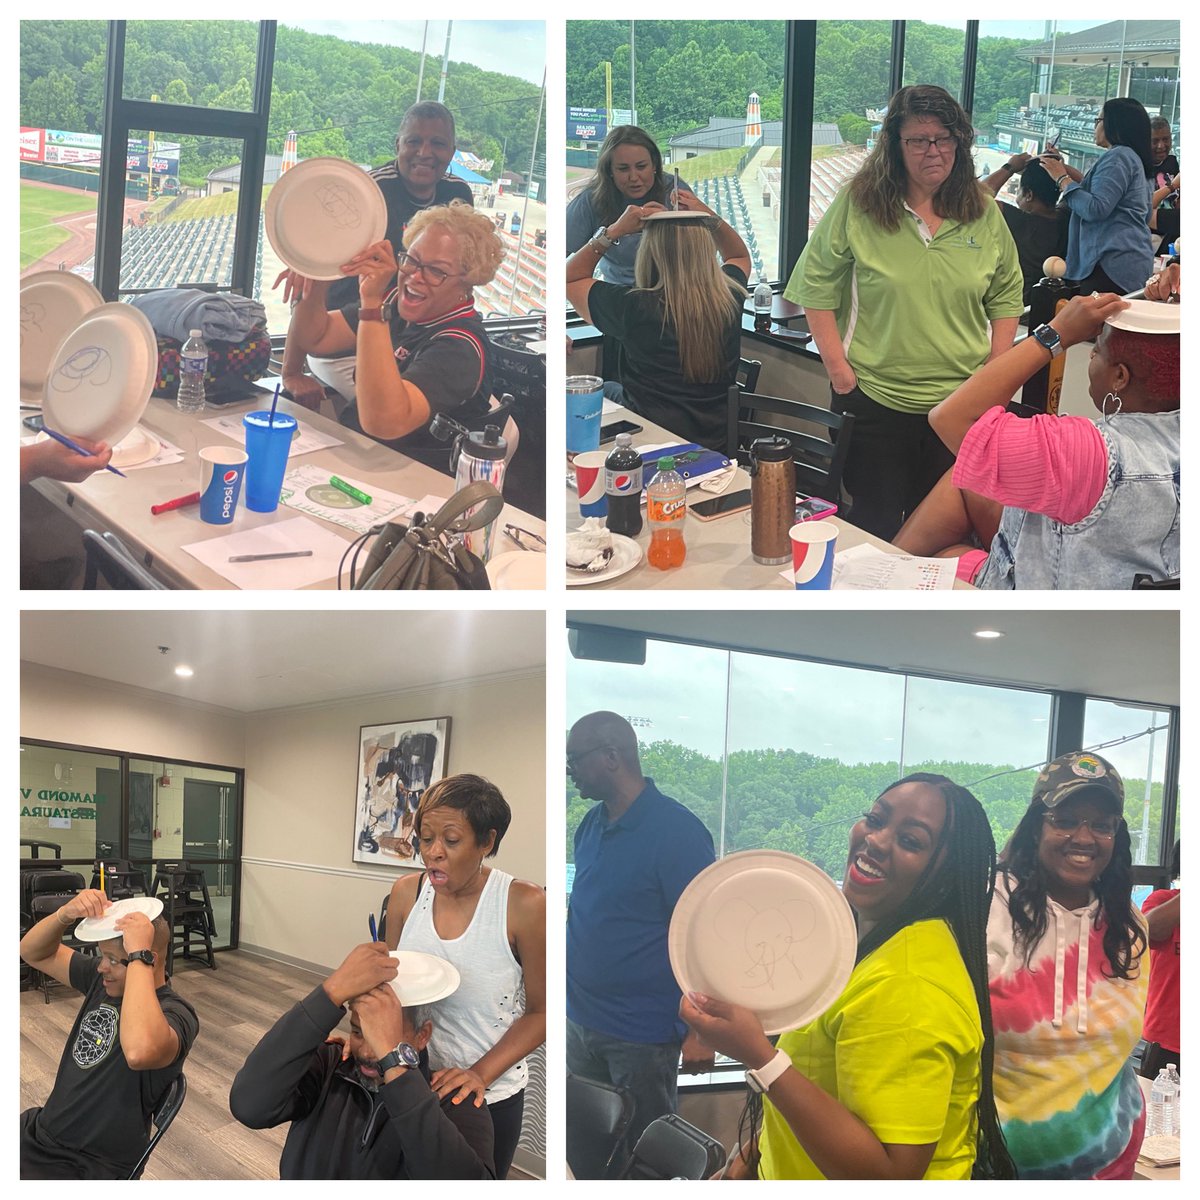 One thing about @OPLLpgcps is we will do the work, have fun, and smile while getting it done! Our team building activities are always legendary. You know it’s a good time when our Director can two step with excitement about our work! @pgcps @CoachKHolden14 #PGCPSProud